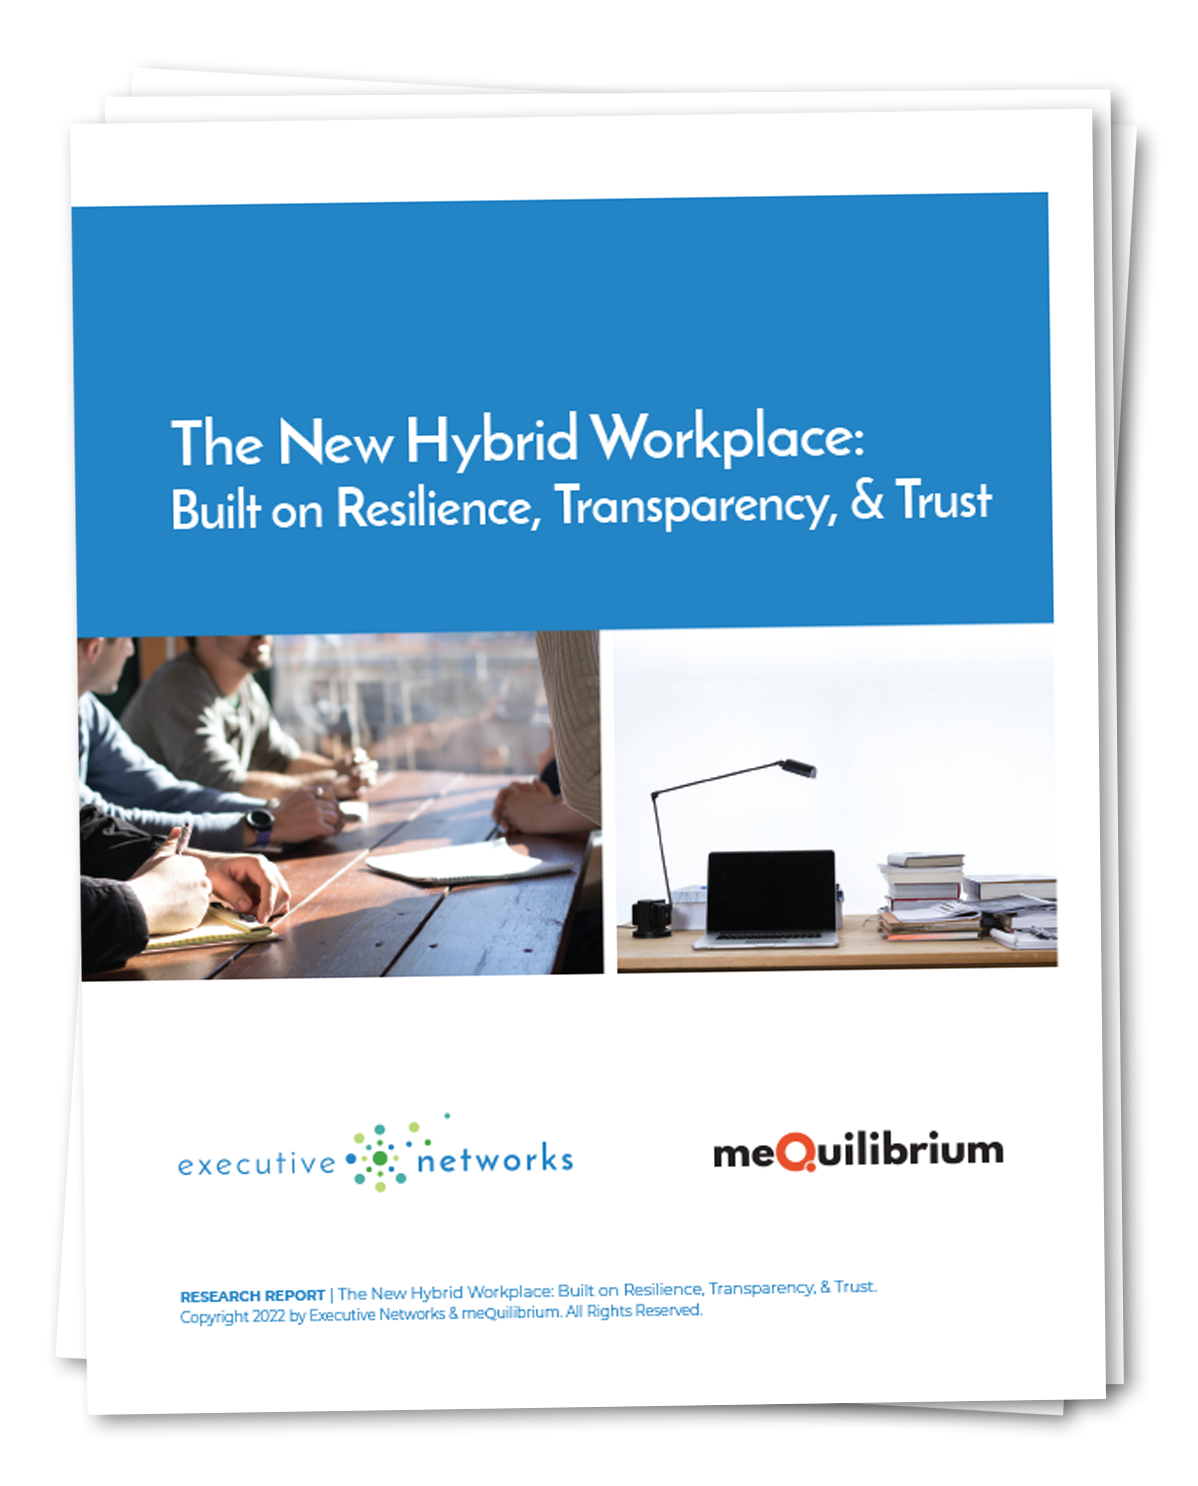 The New Hybrid Workplace